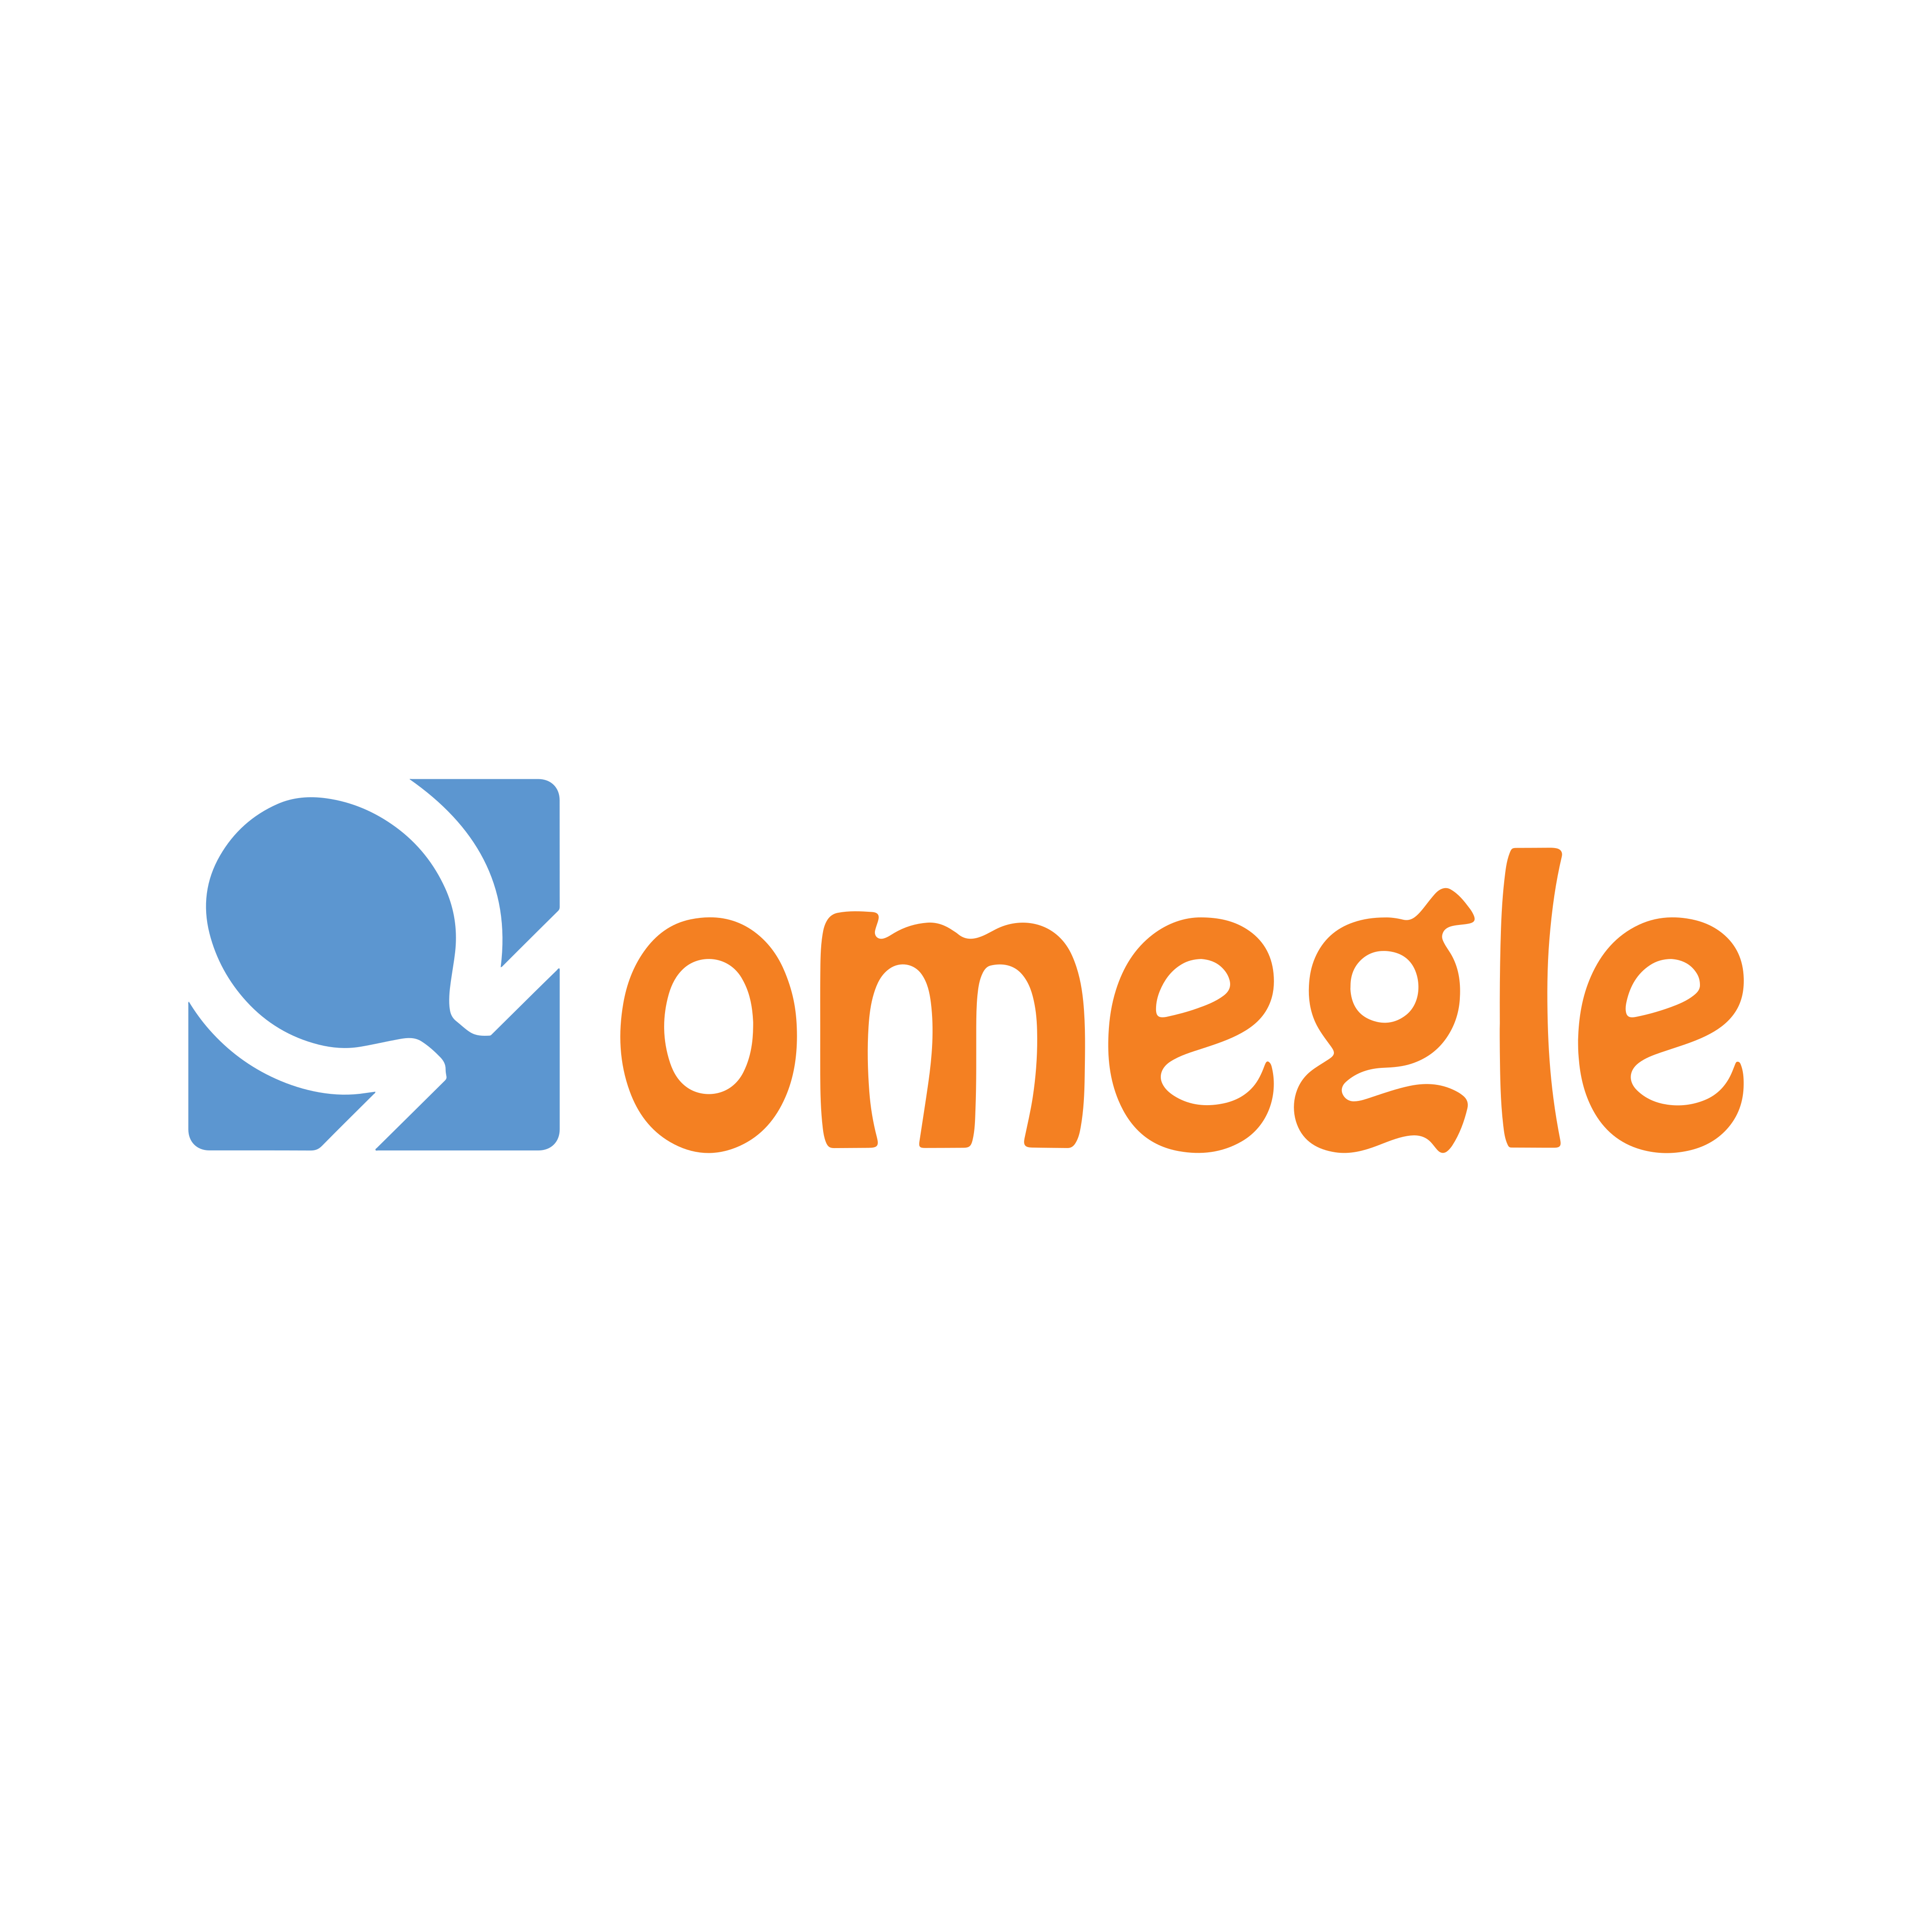 Omegle Logo PNG.